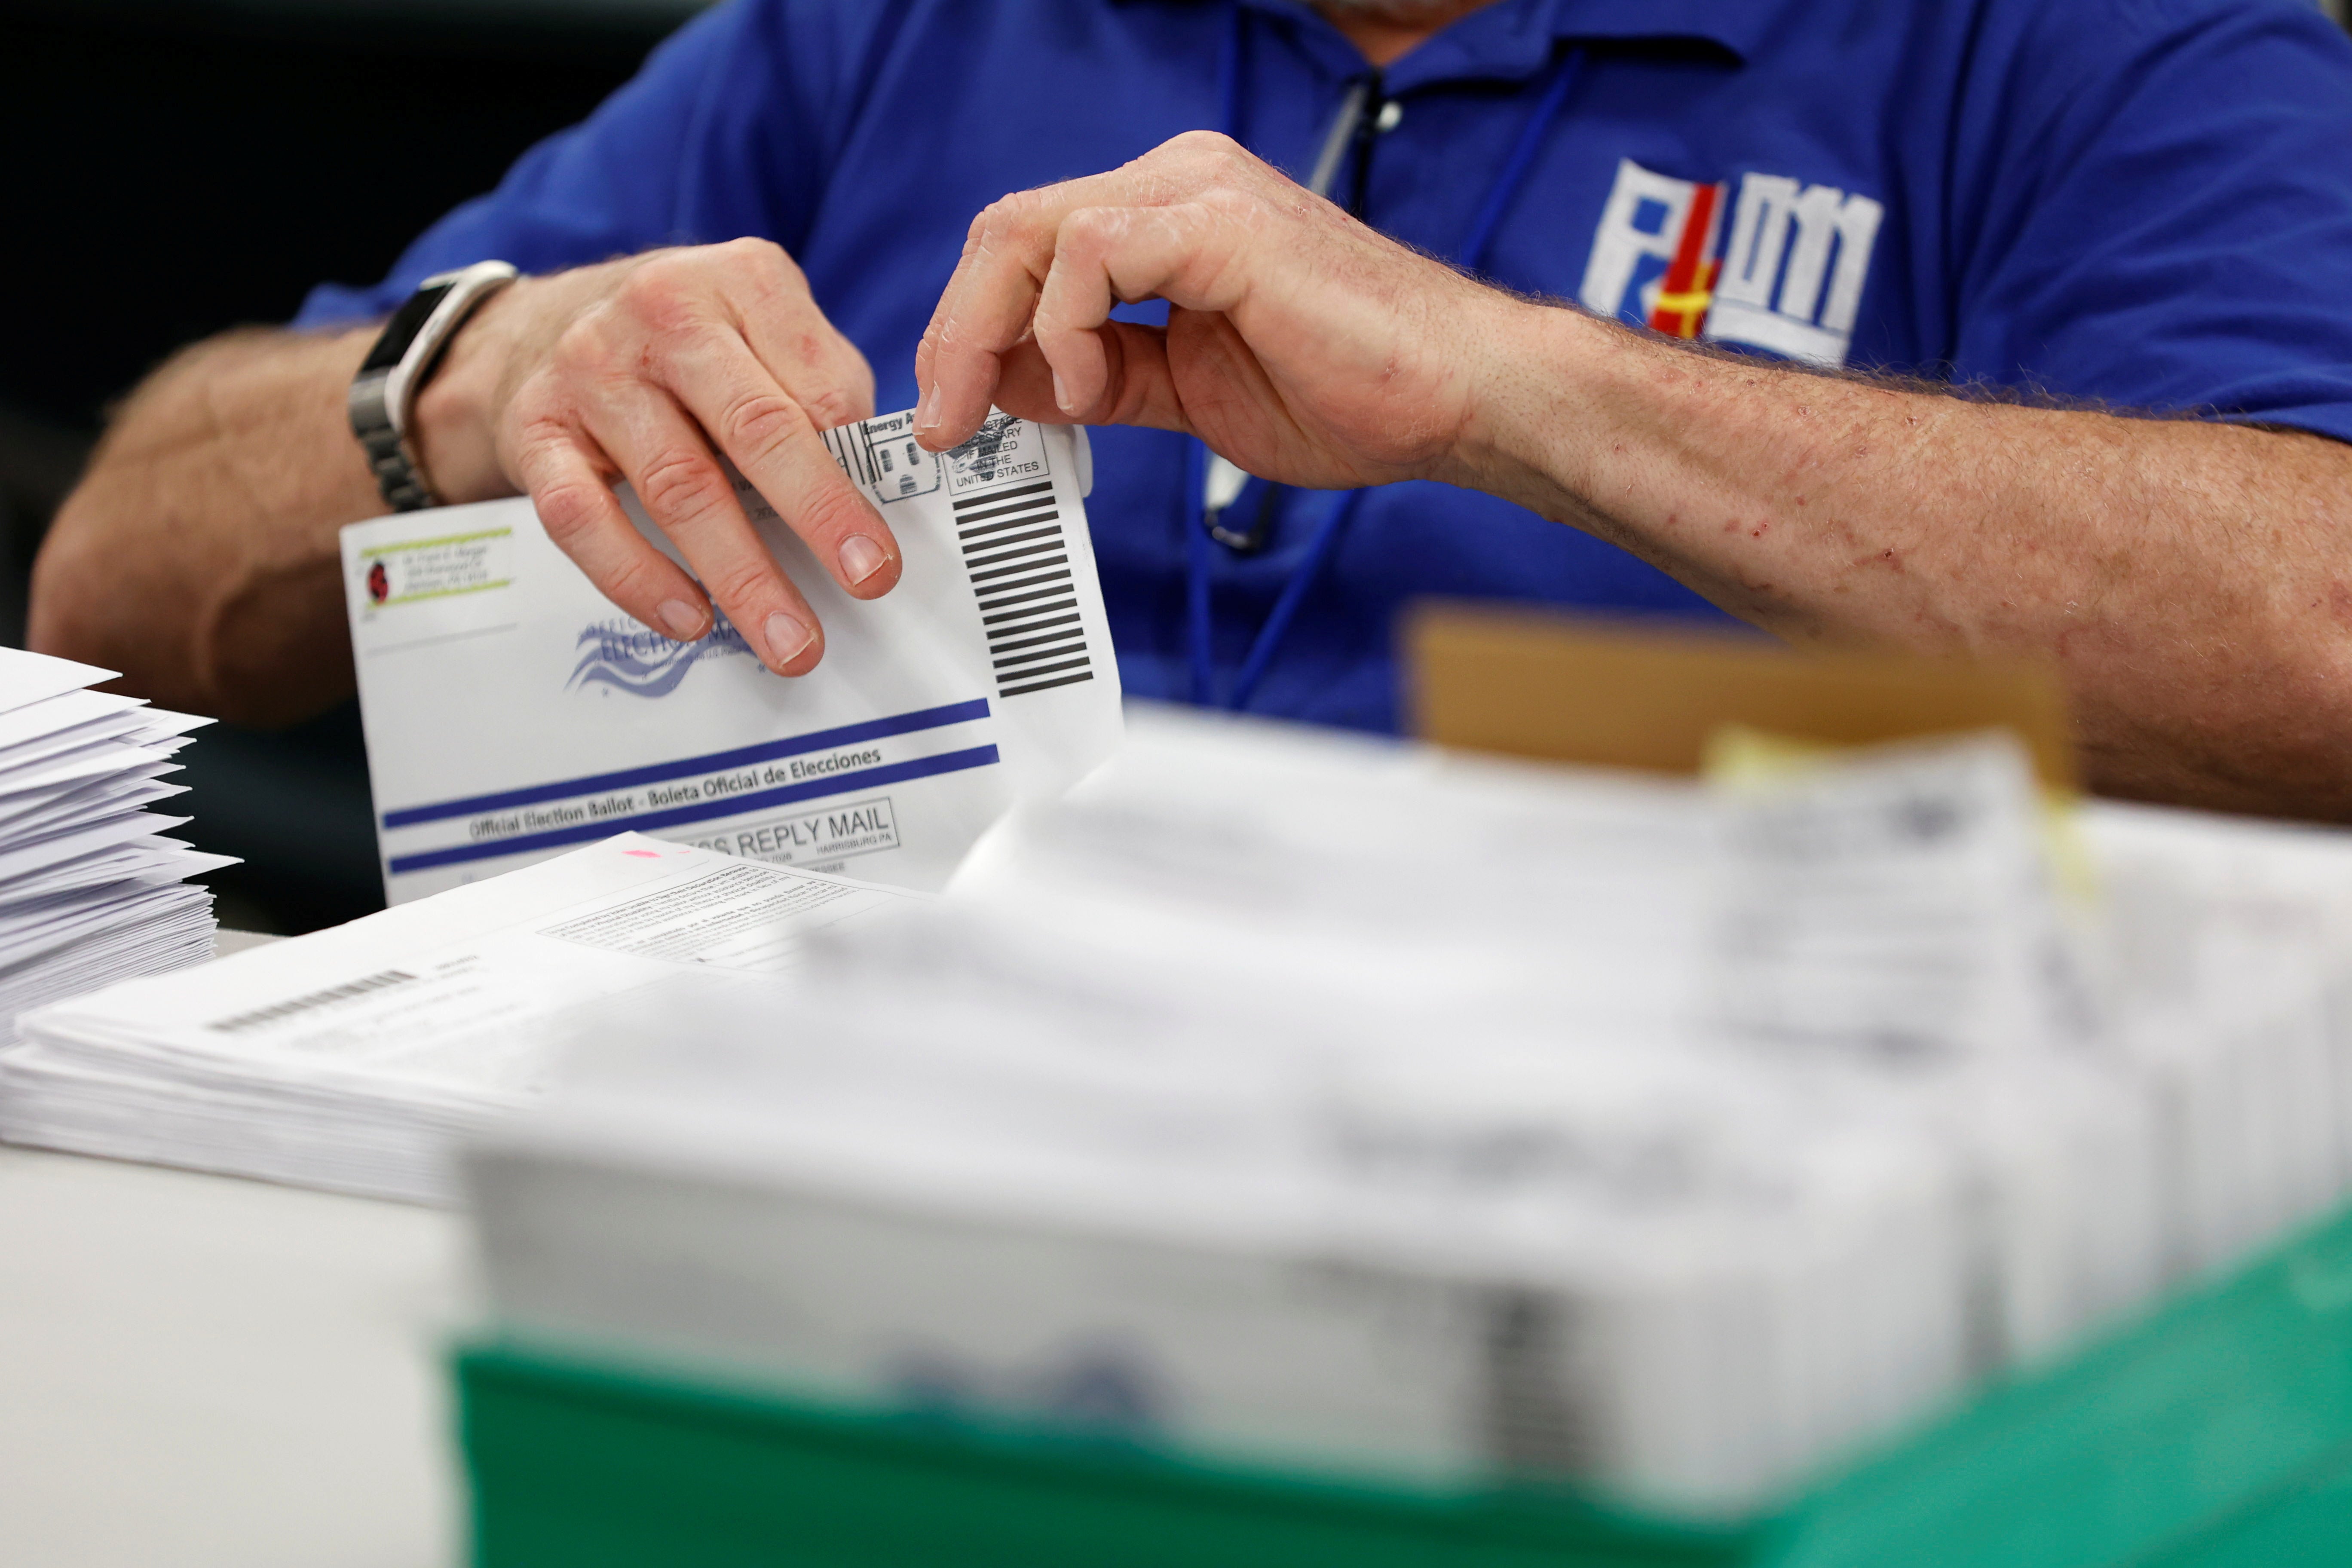 An election worker's hands are seen opening a mail-in ballot taken from a box of ballots.